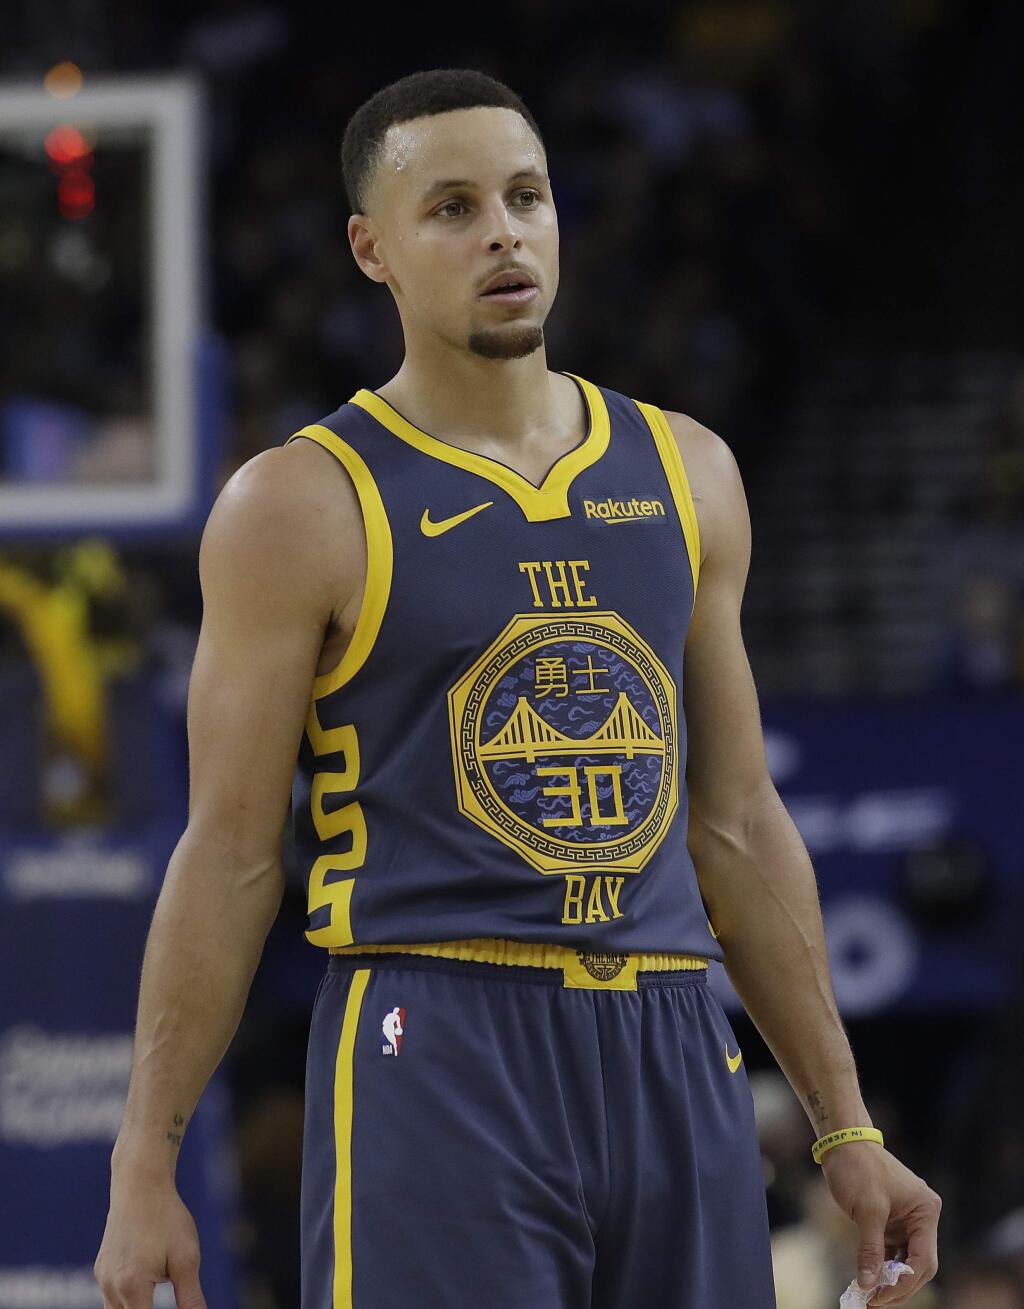 Golden State Warriors guard Stephen Curry (30) during the second half of an NBA basketball game against the Toronto Raptors in Oakland, Calif., Wednesday, Dec. 12, 2018. (AP Photo/Jeff Chiu)